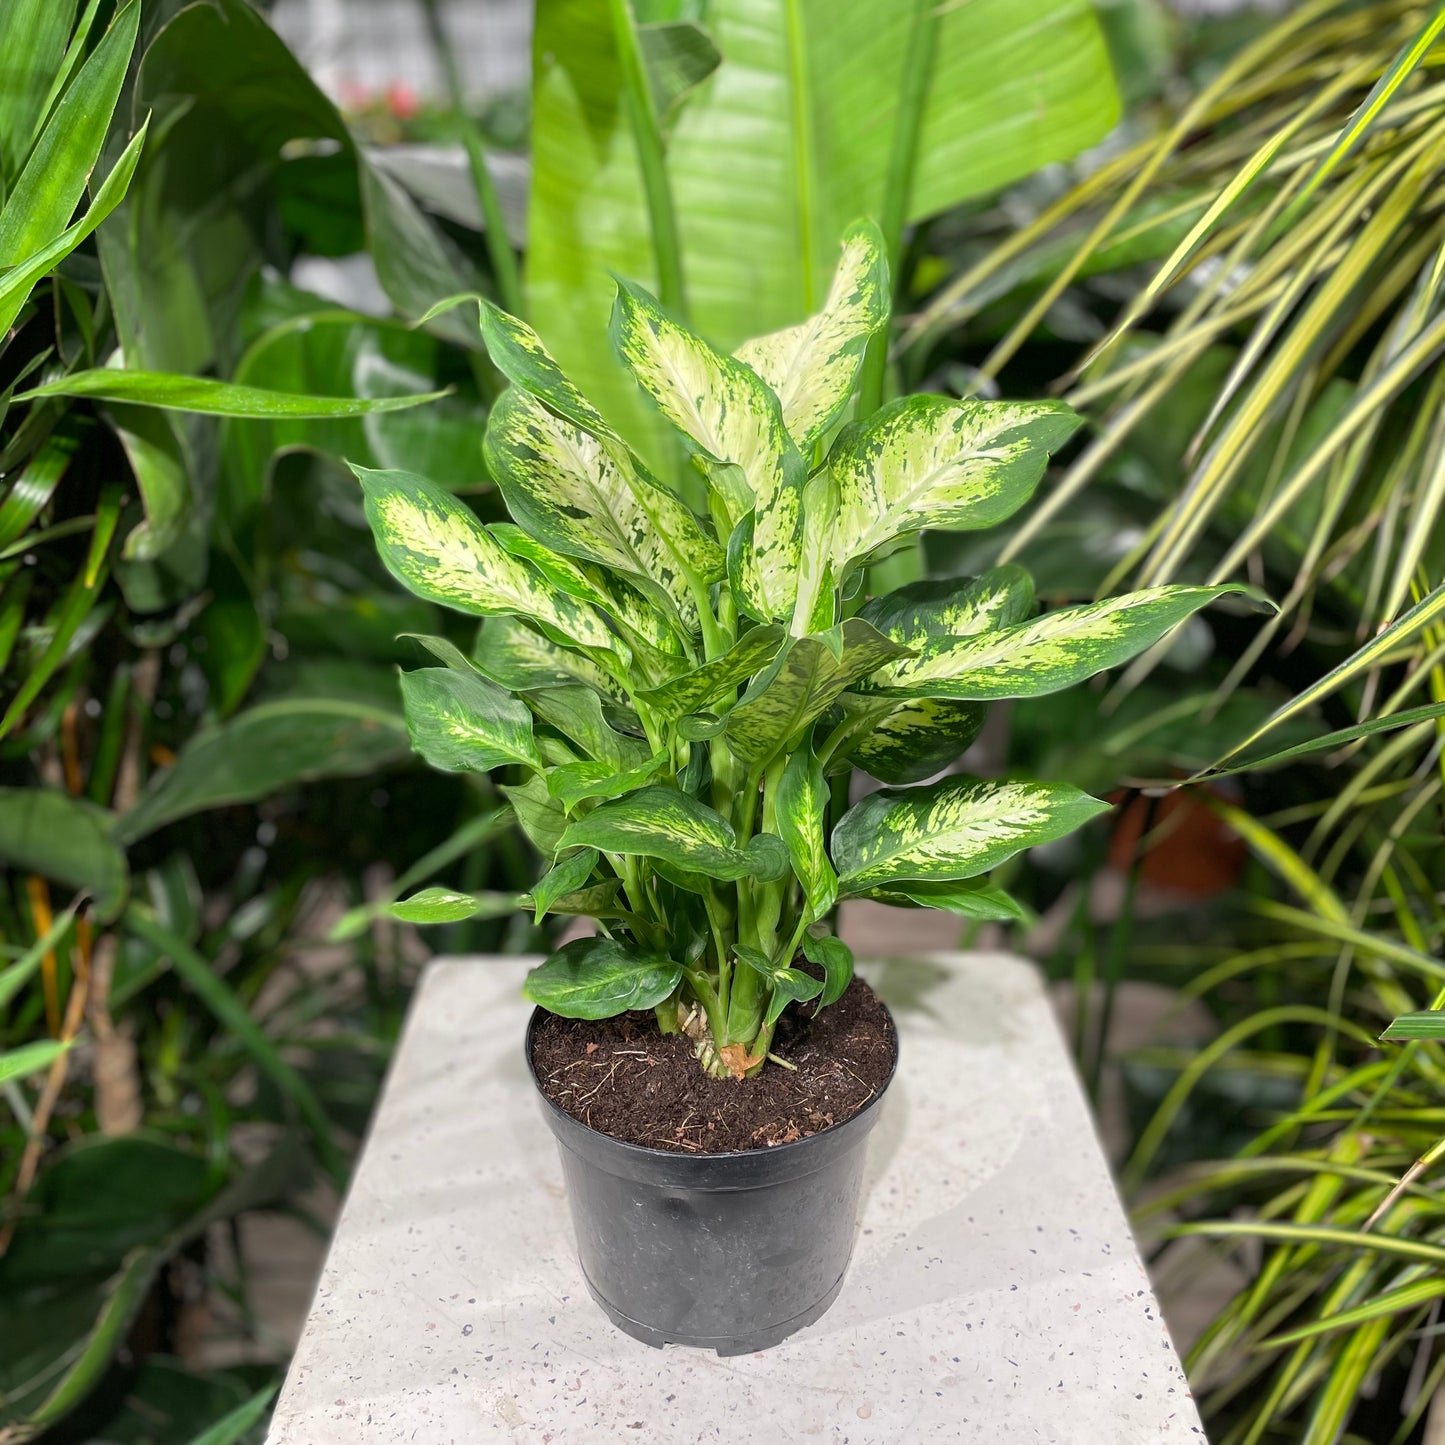 Dumb Can (Dieffenbachia) in a 6 inch pot. Indoor plant for sale by Promise Supply for delivery and pickup in Toronto